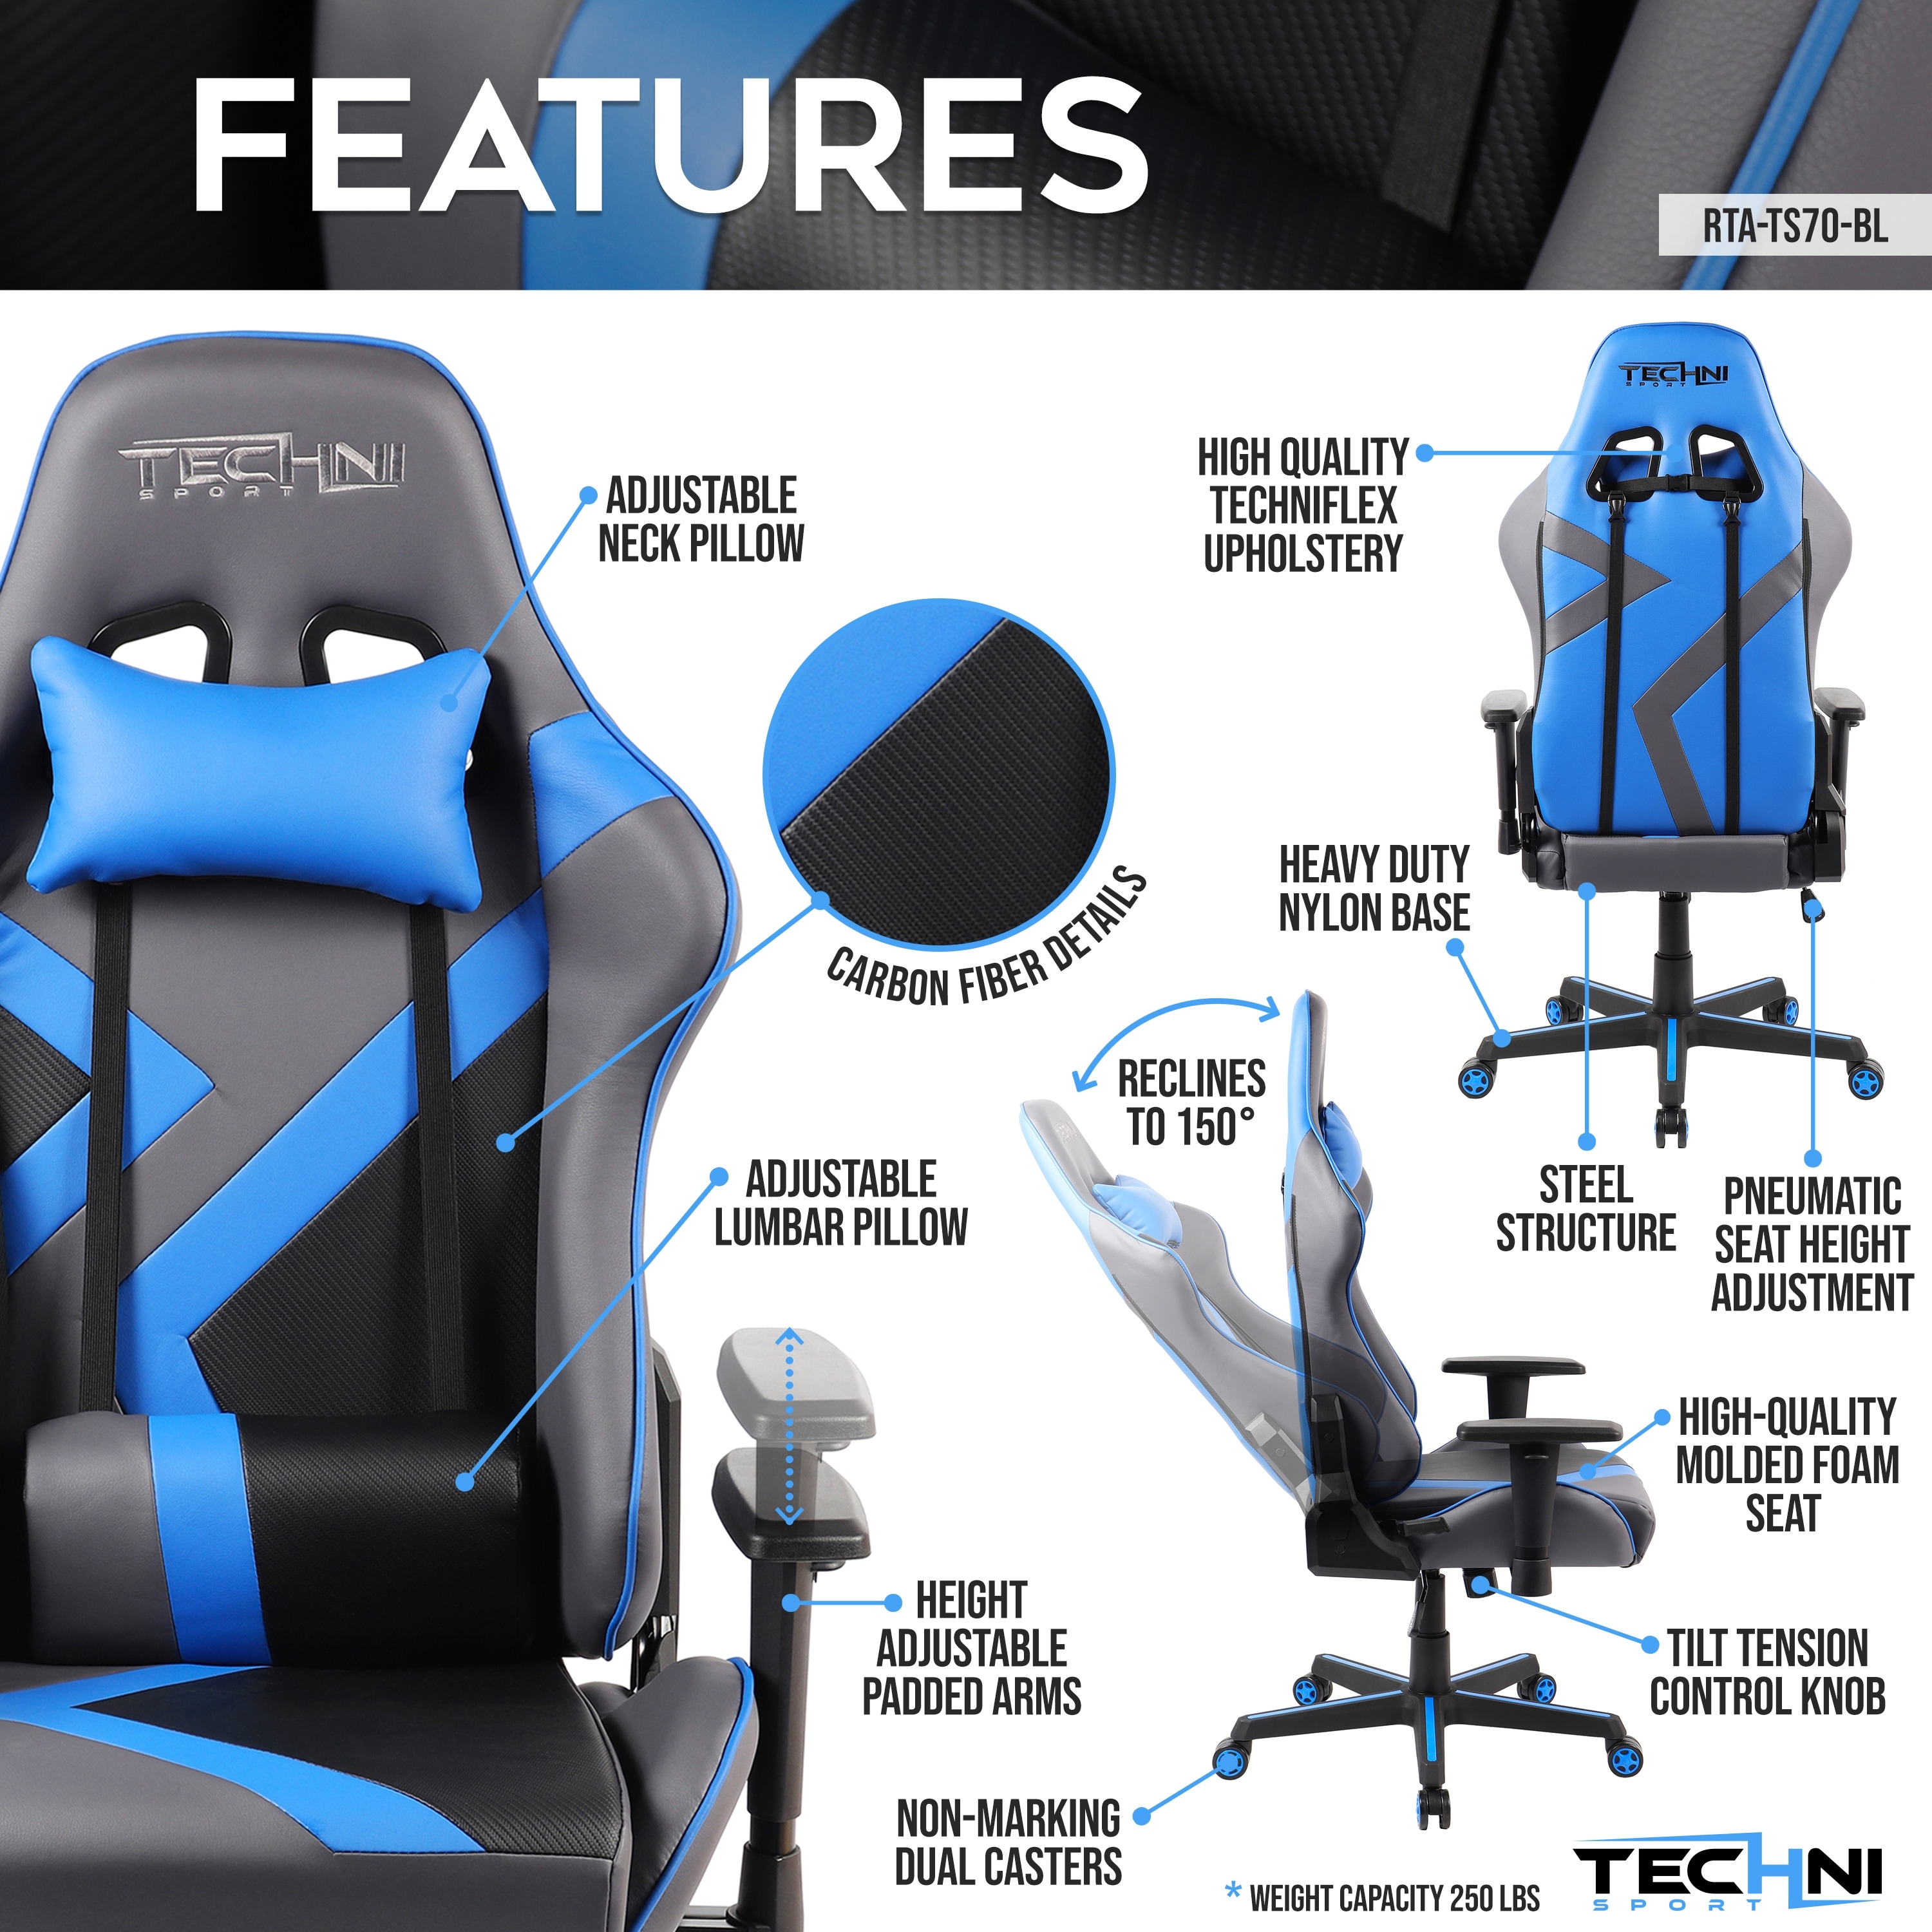 https://ak1.ostkcdn.com/images/products/is/images/direct/37cd58ff3f7c7dc108626b929d627cd46ef9e611/Office-Gaming-Chair-Ergonomic-Adjustable-Chair-Head-and-Lumbar-Pillows.jpg